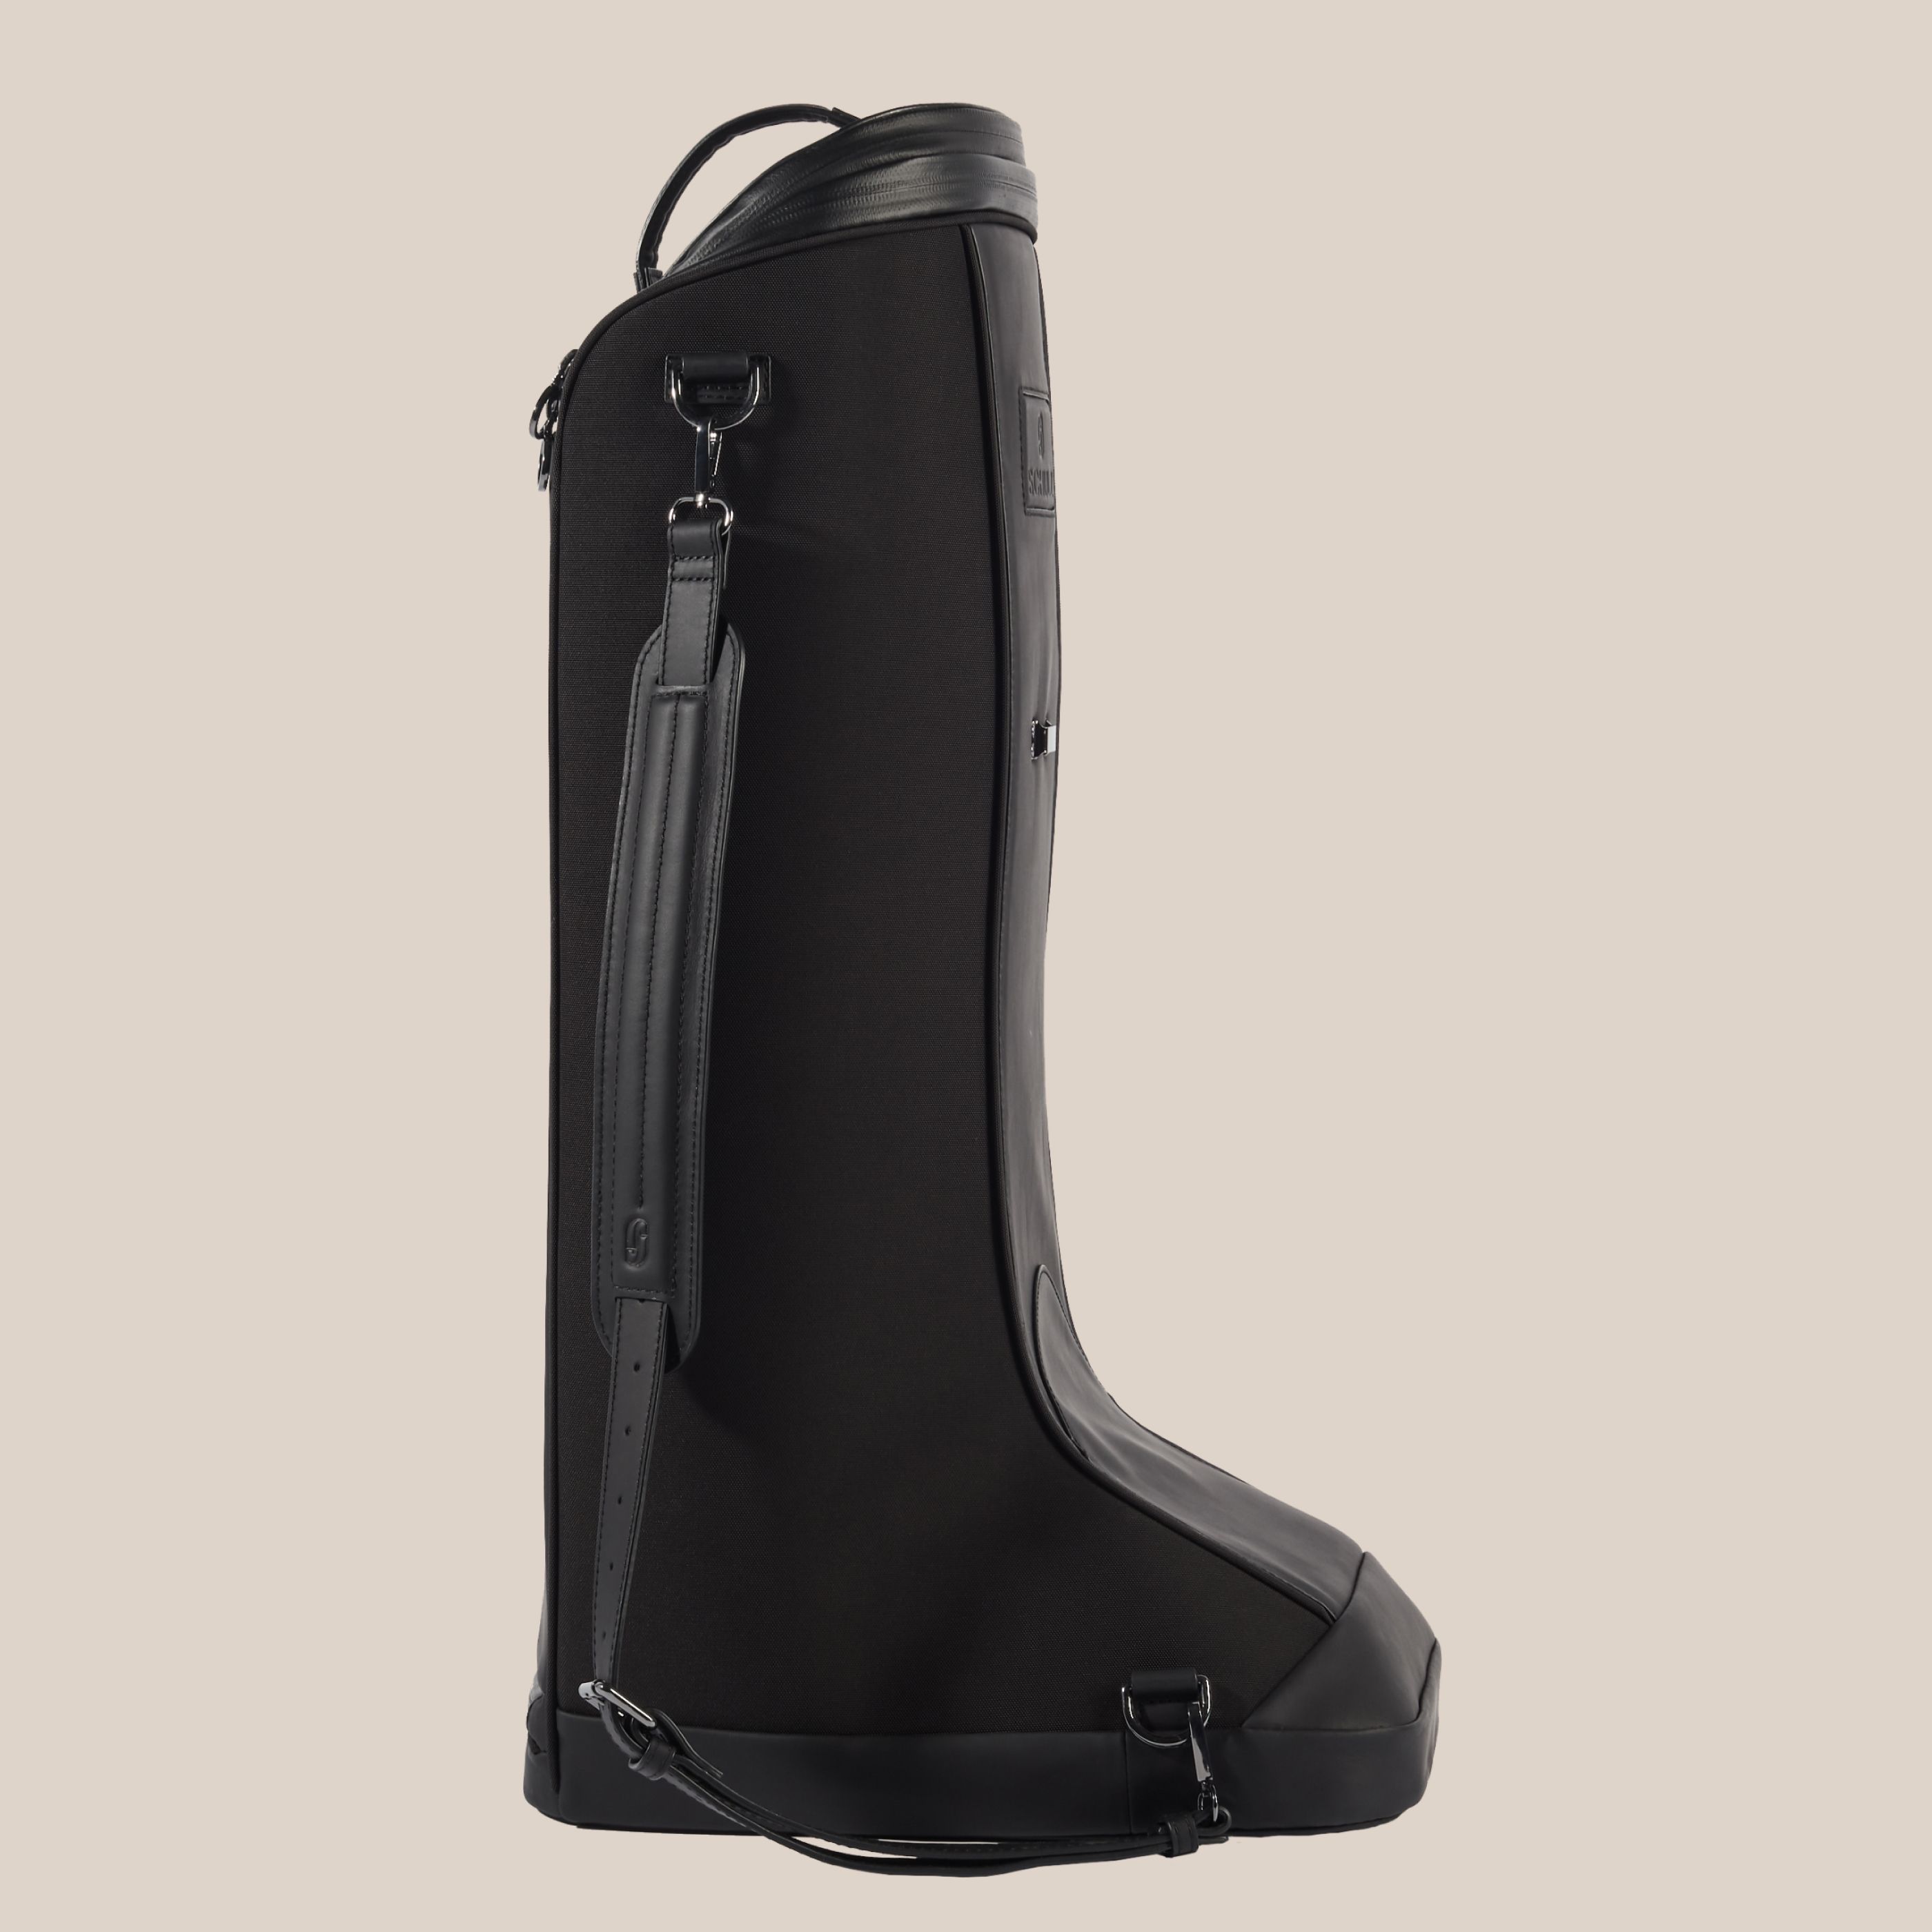 horse riding boot bag in black leather with Anesi shoulder strap